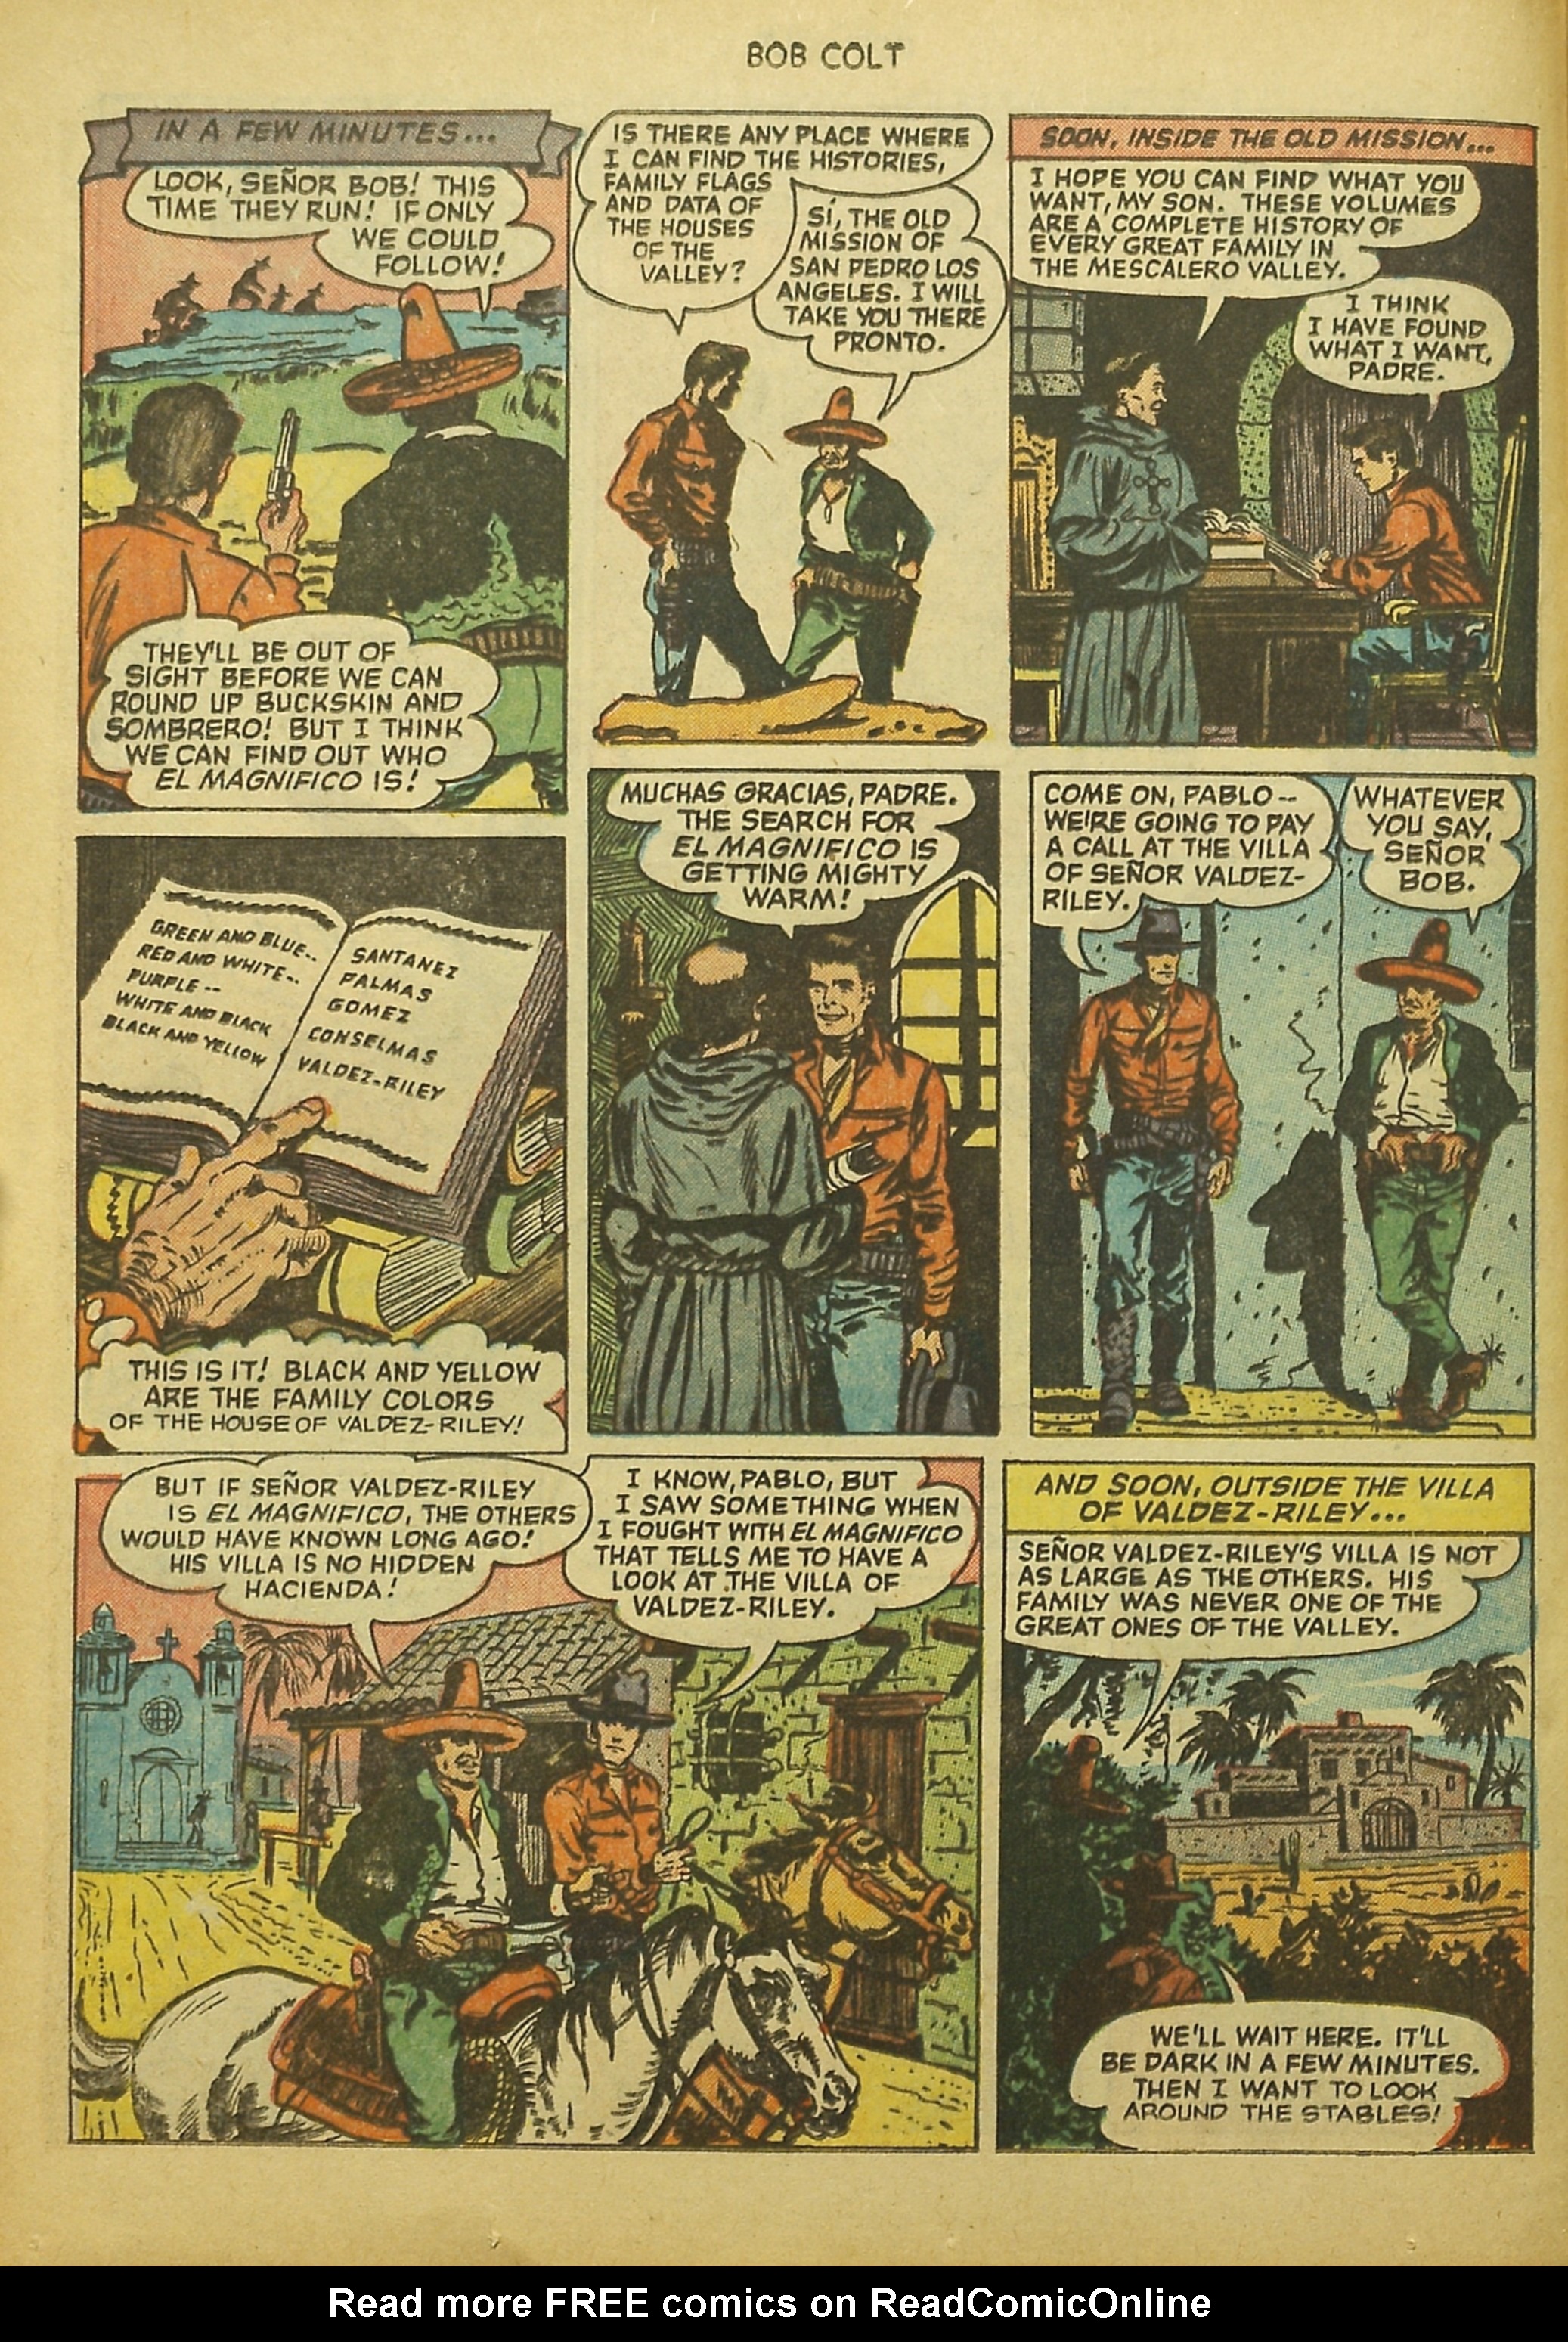 Read online Bob Colt Western comic -  Issue #9 - 12